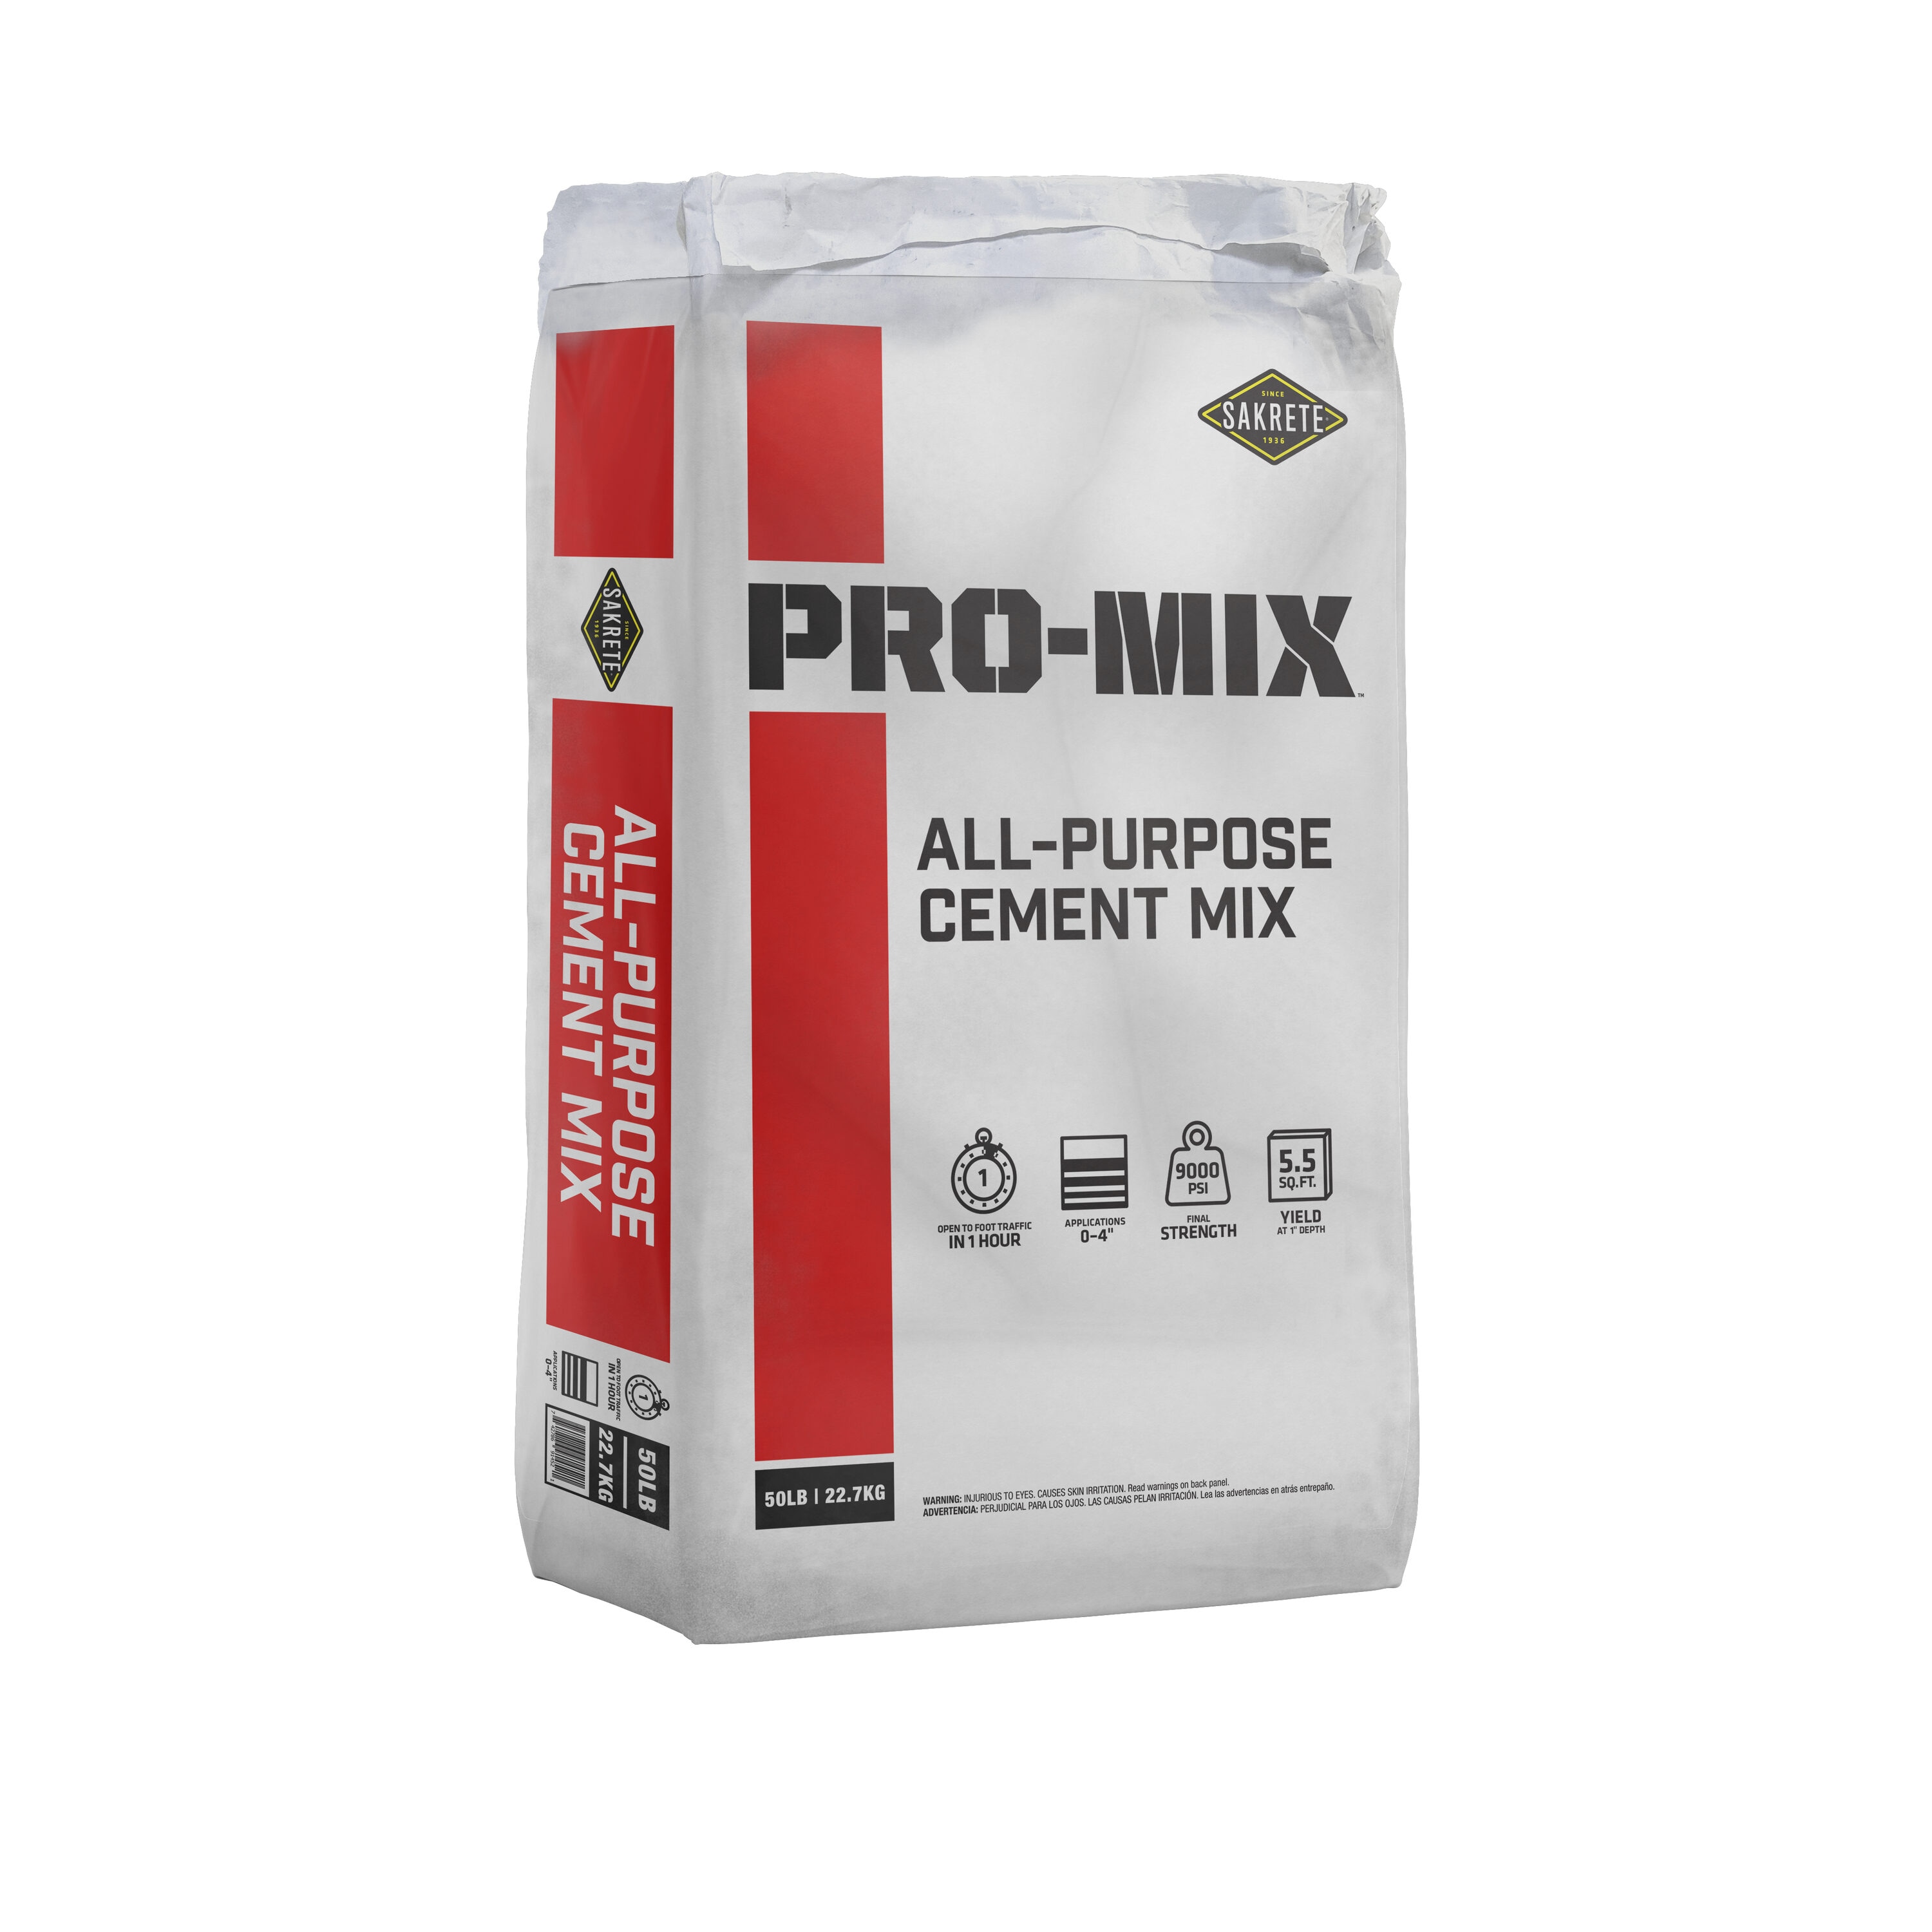 Rowebb Ltd - Short term offer on OPC cement currently at £5.55/bag